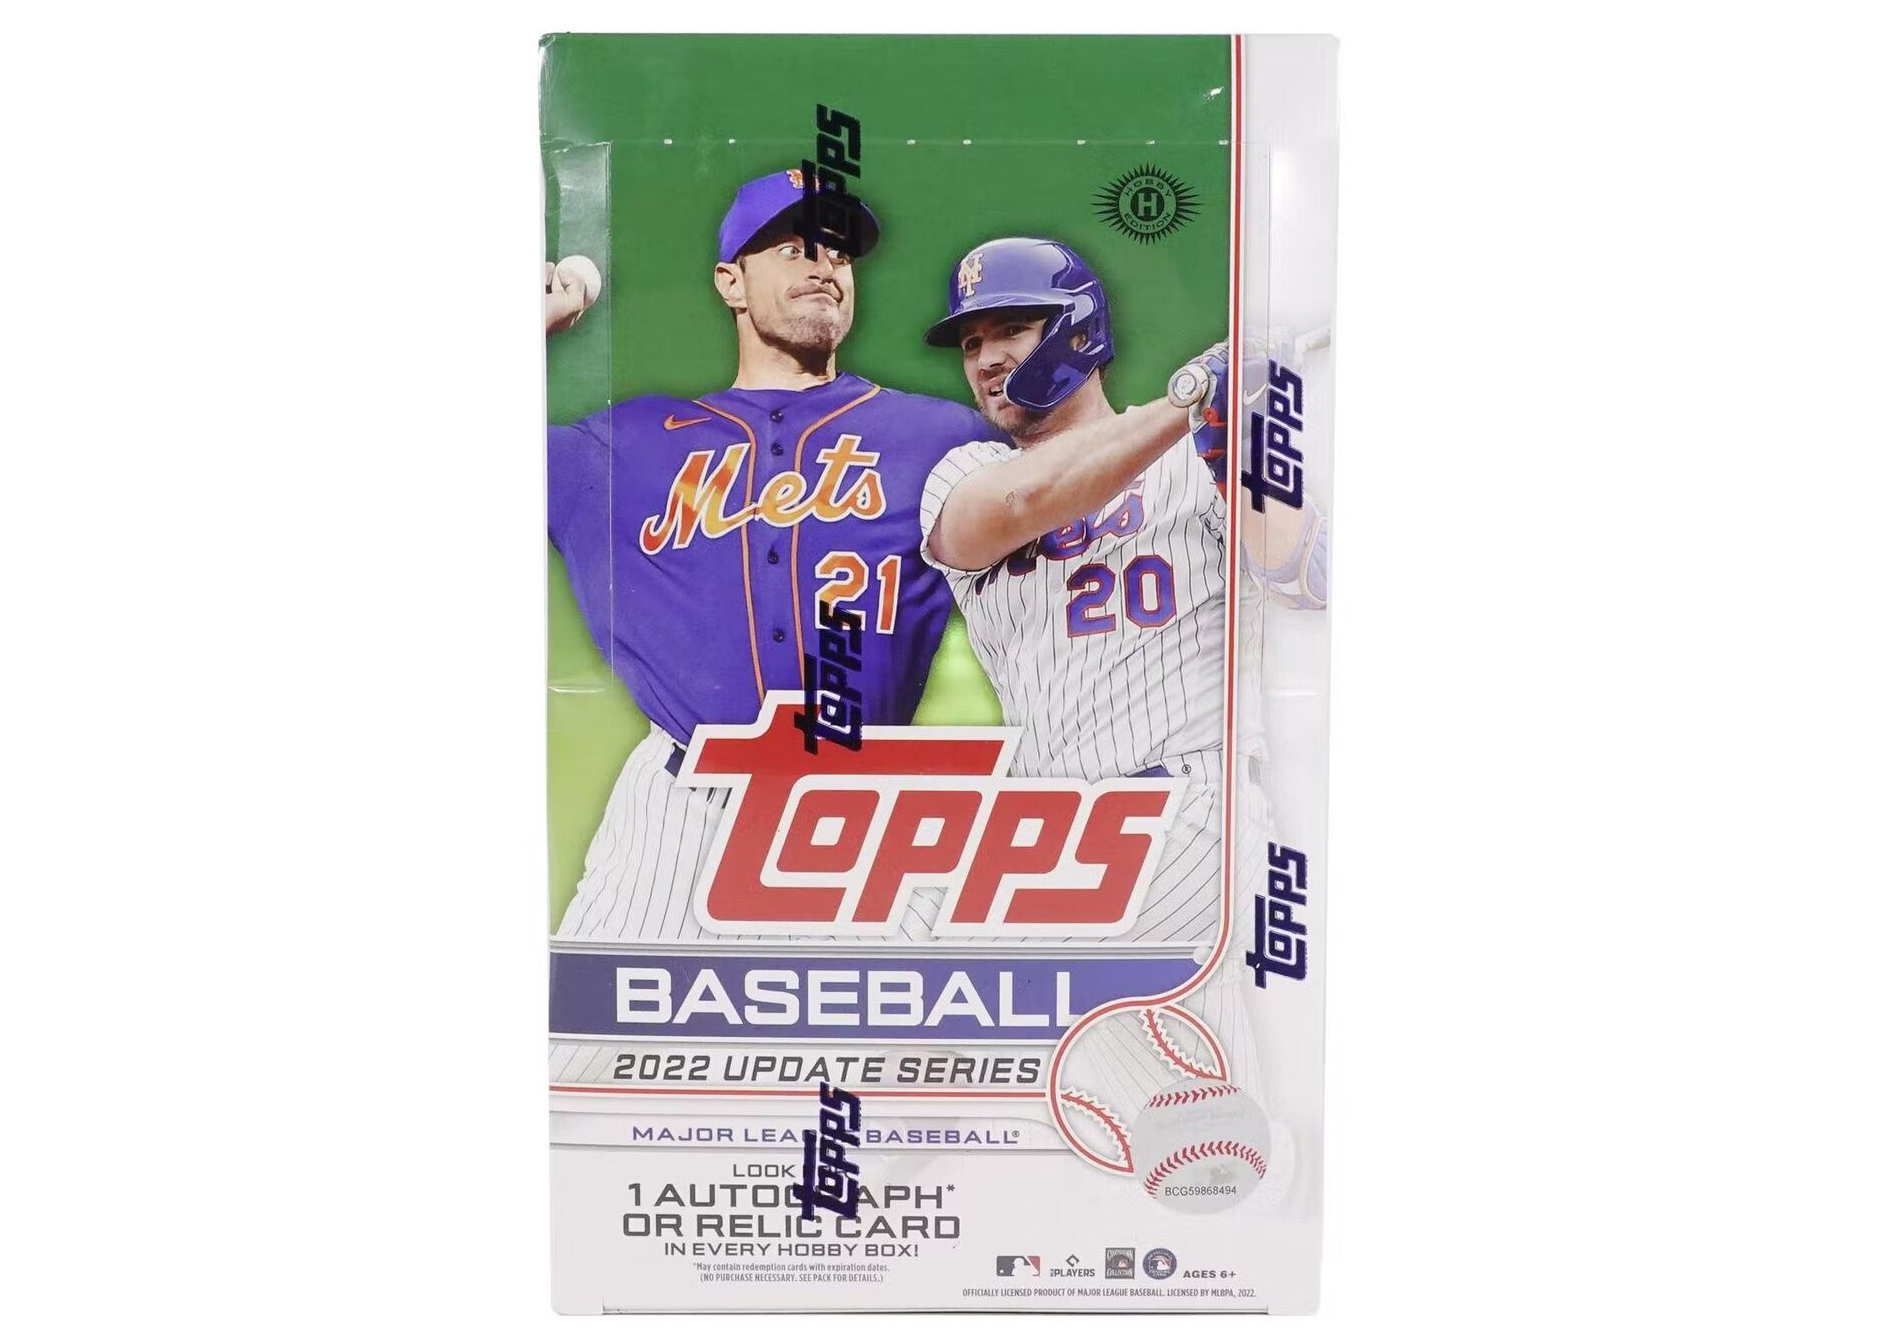 MLB will end 70year deal with trading card company Topps